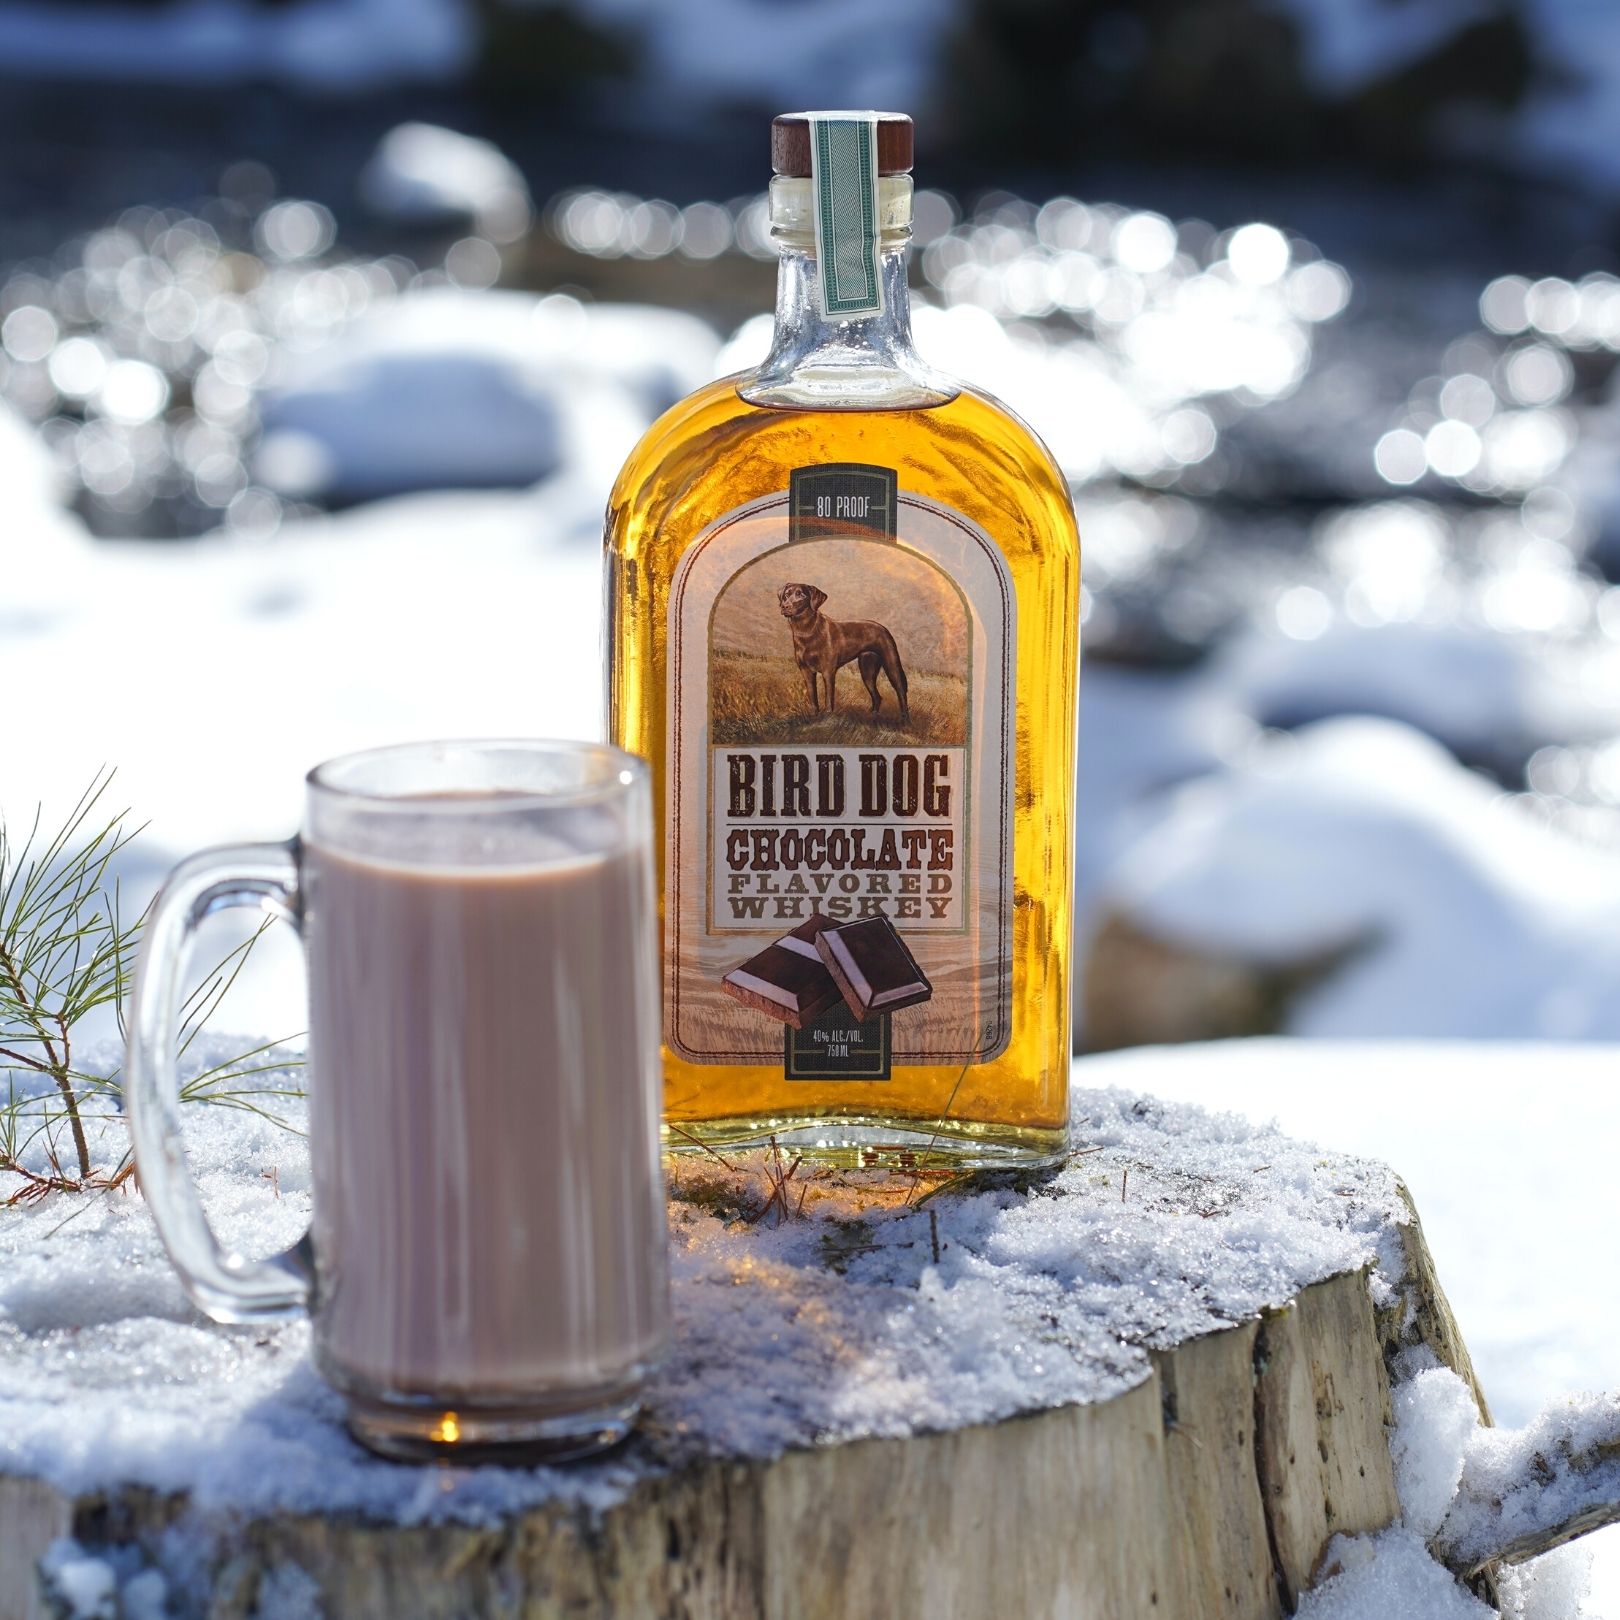 Bottle of Bird Dog Chocolate Whiskey with a Cocktail